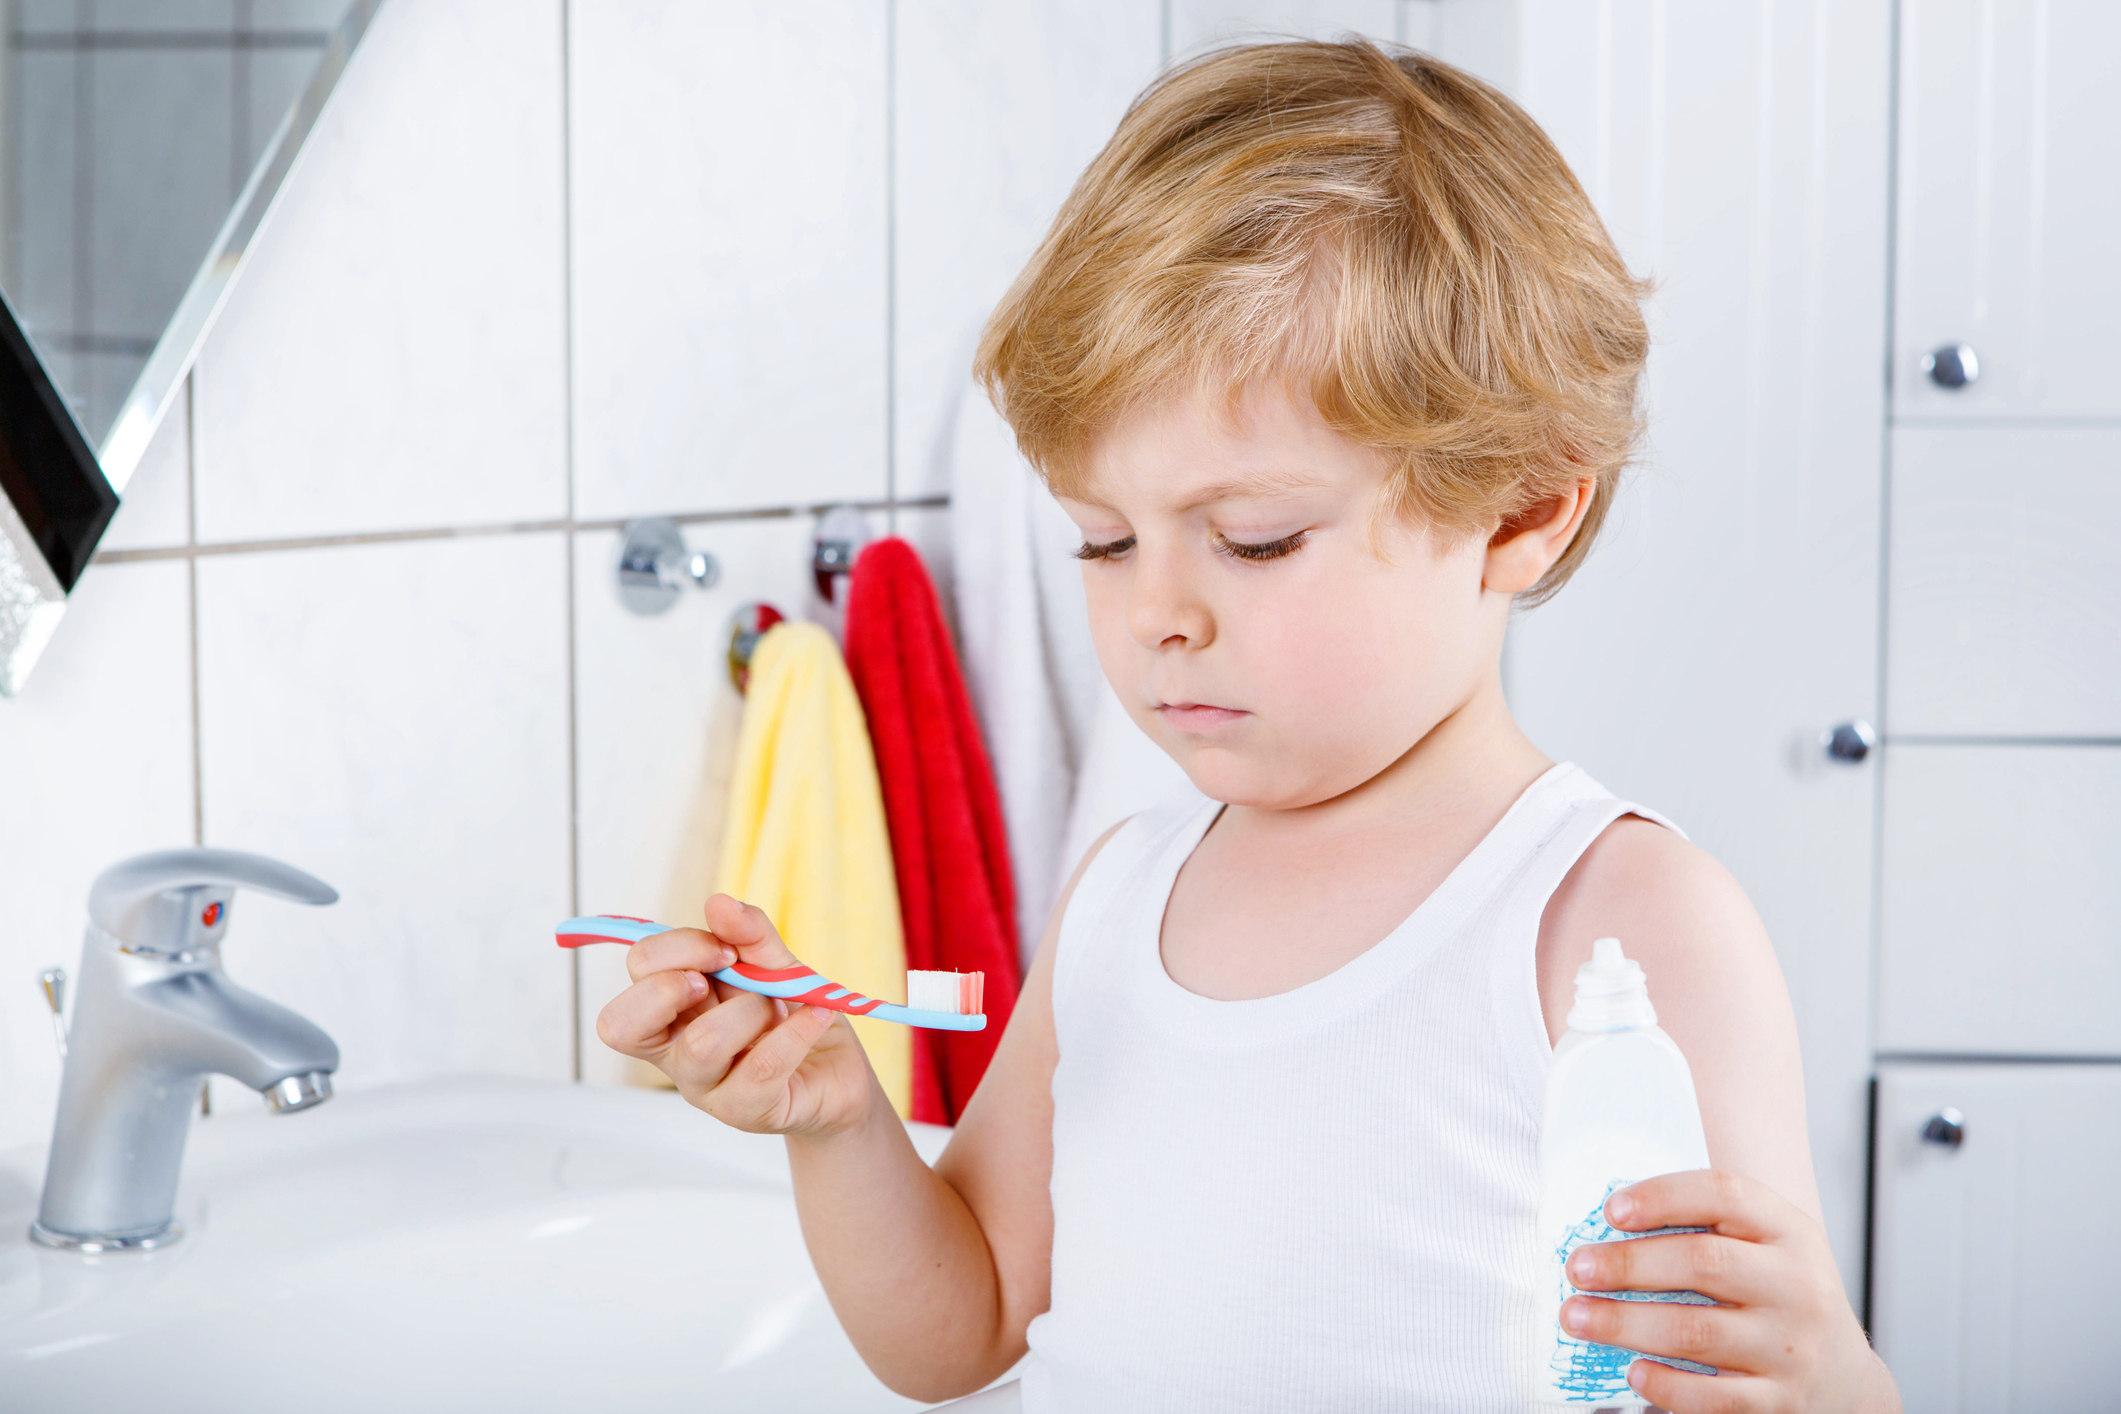 Cute blond kid boy of 2 years learning brushing his teeth in domestic bath. Children learning how to stay healthy.